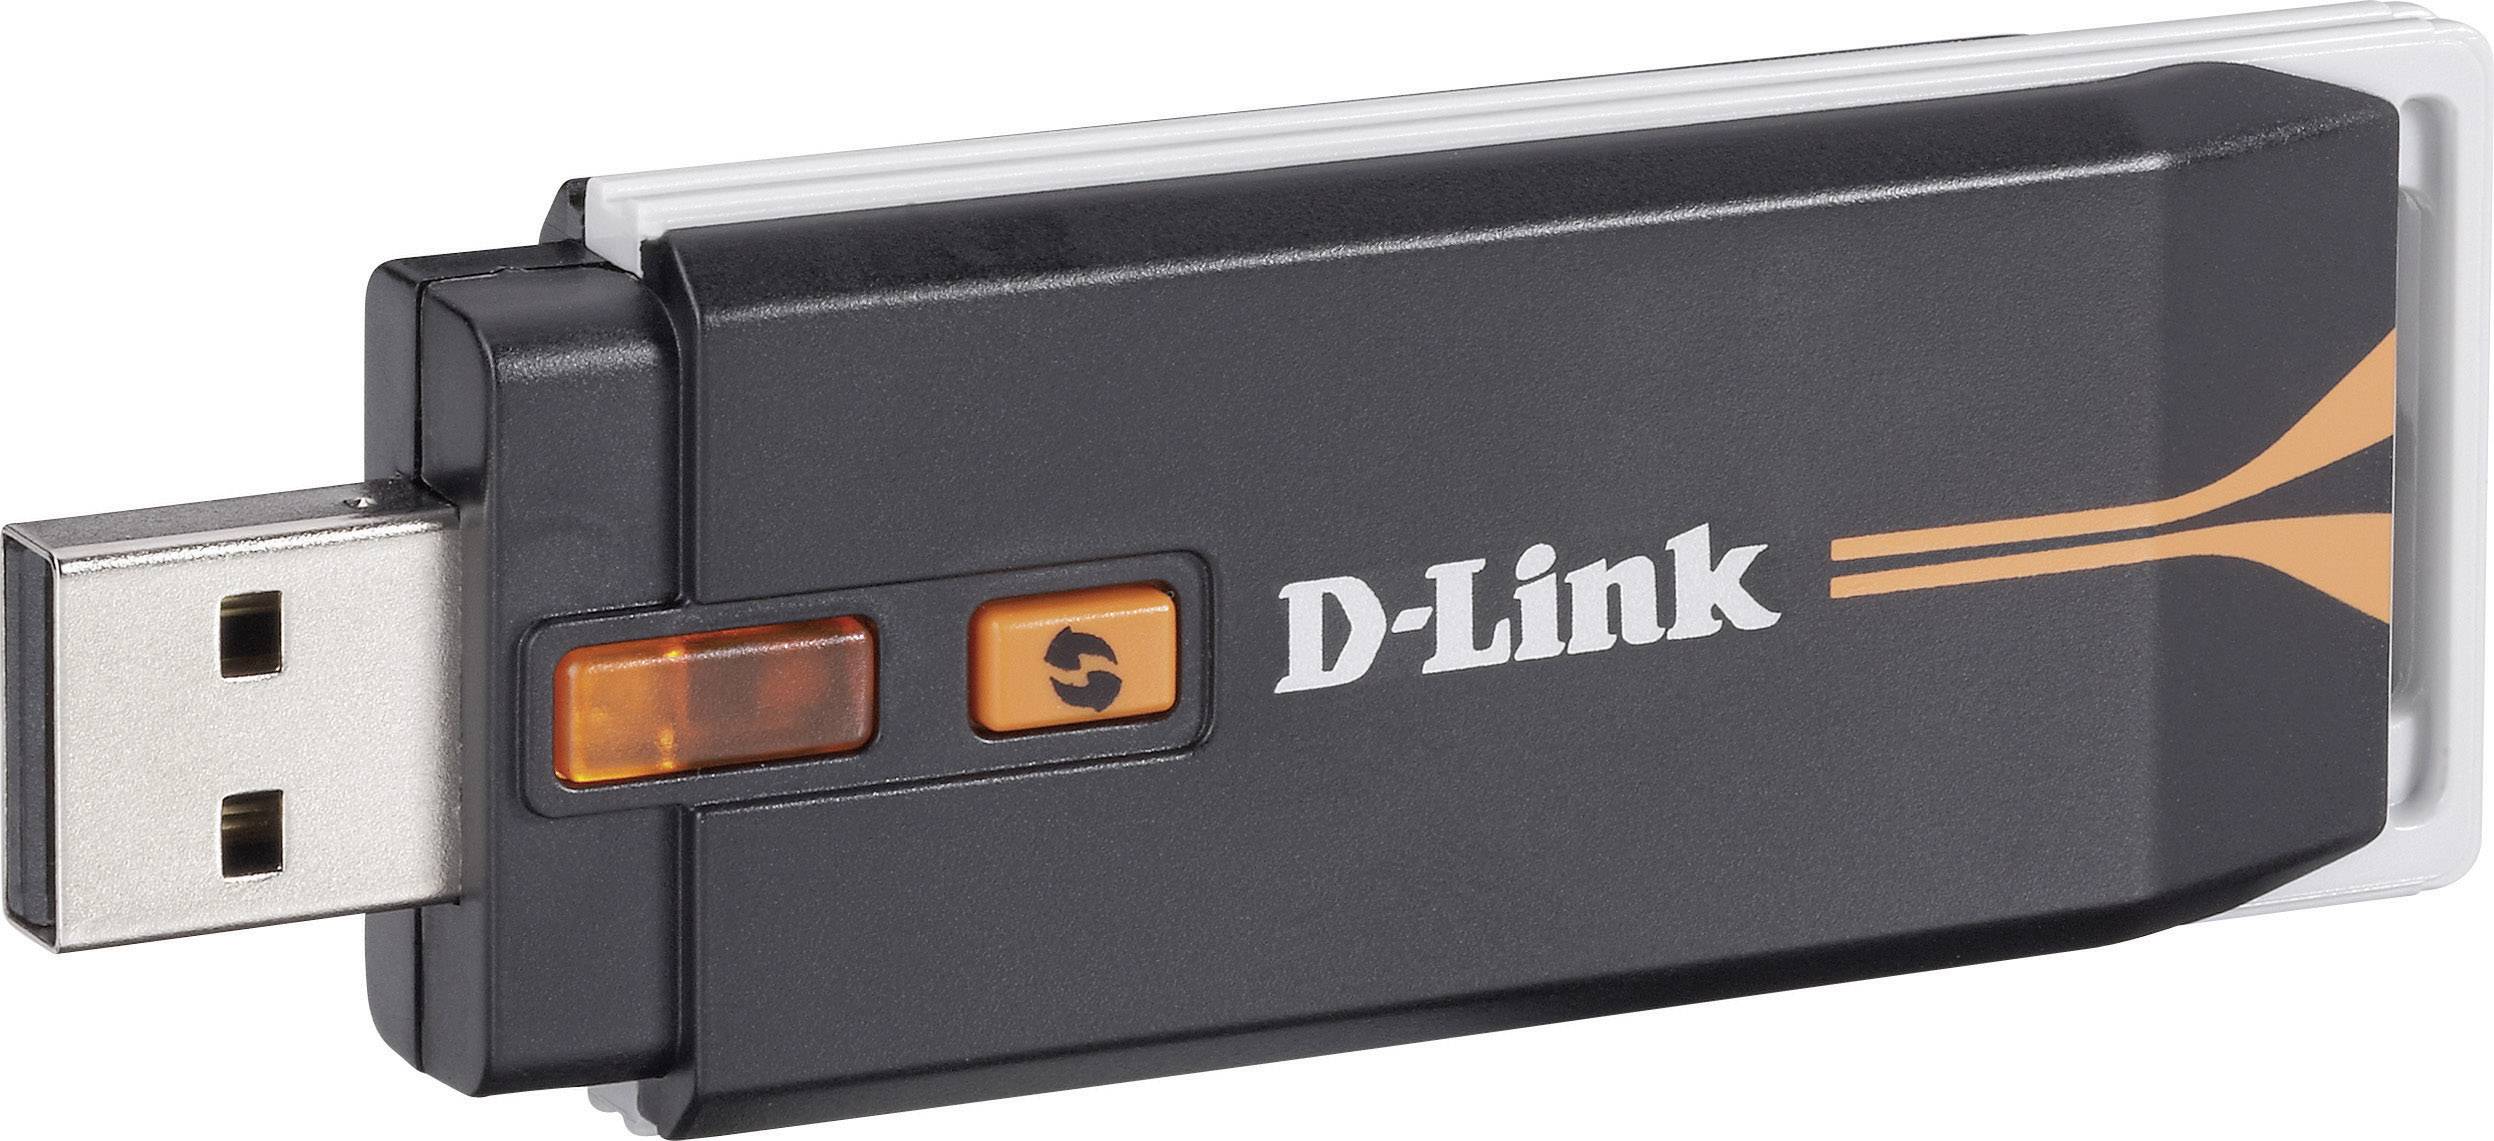 d link wireless network adapter driver download